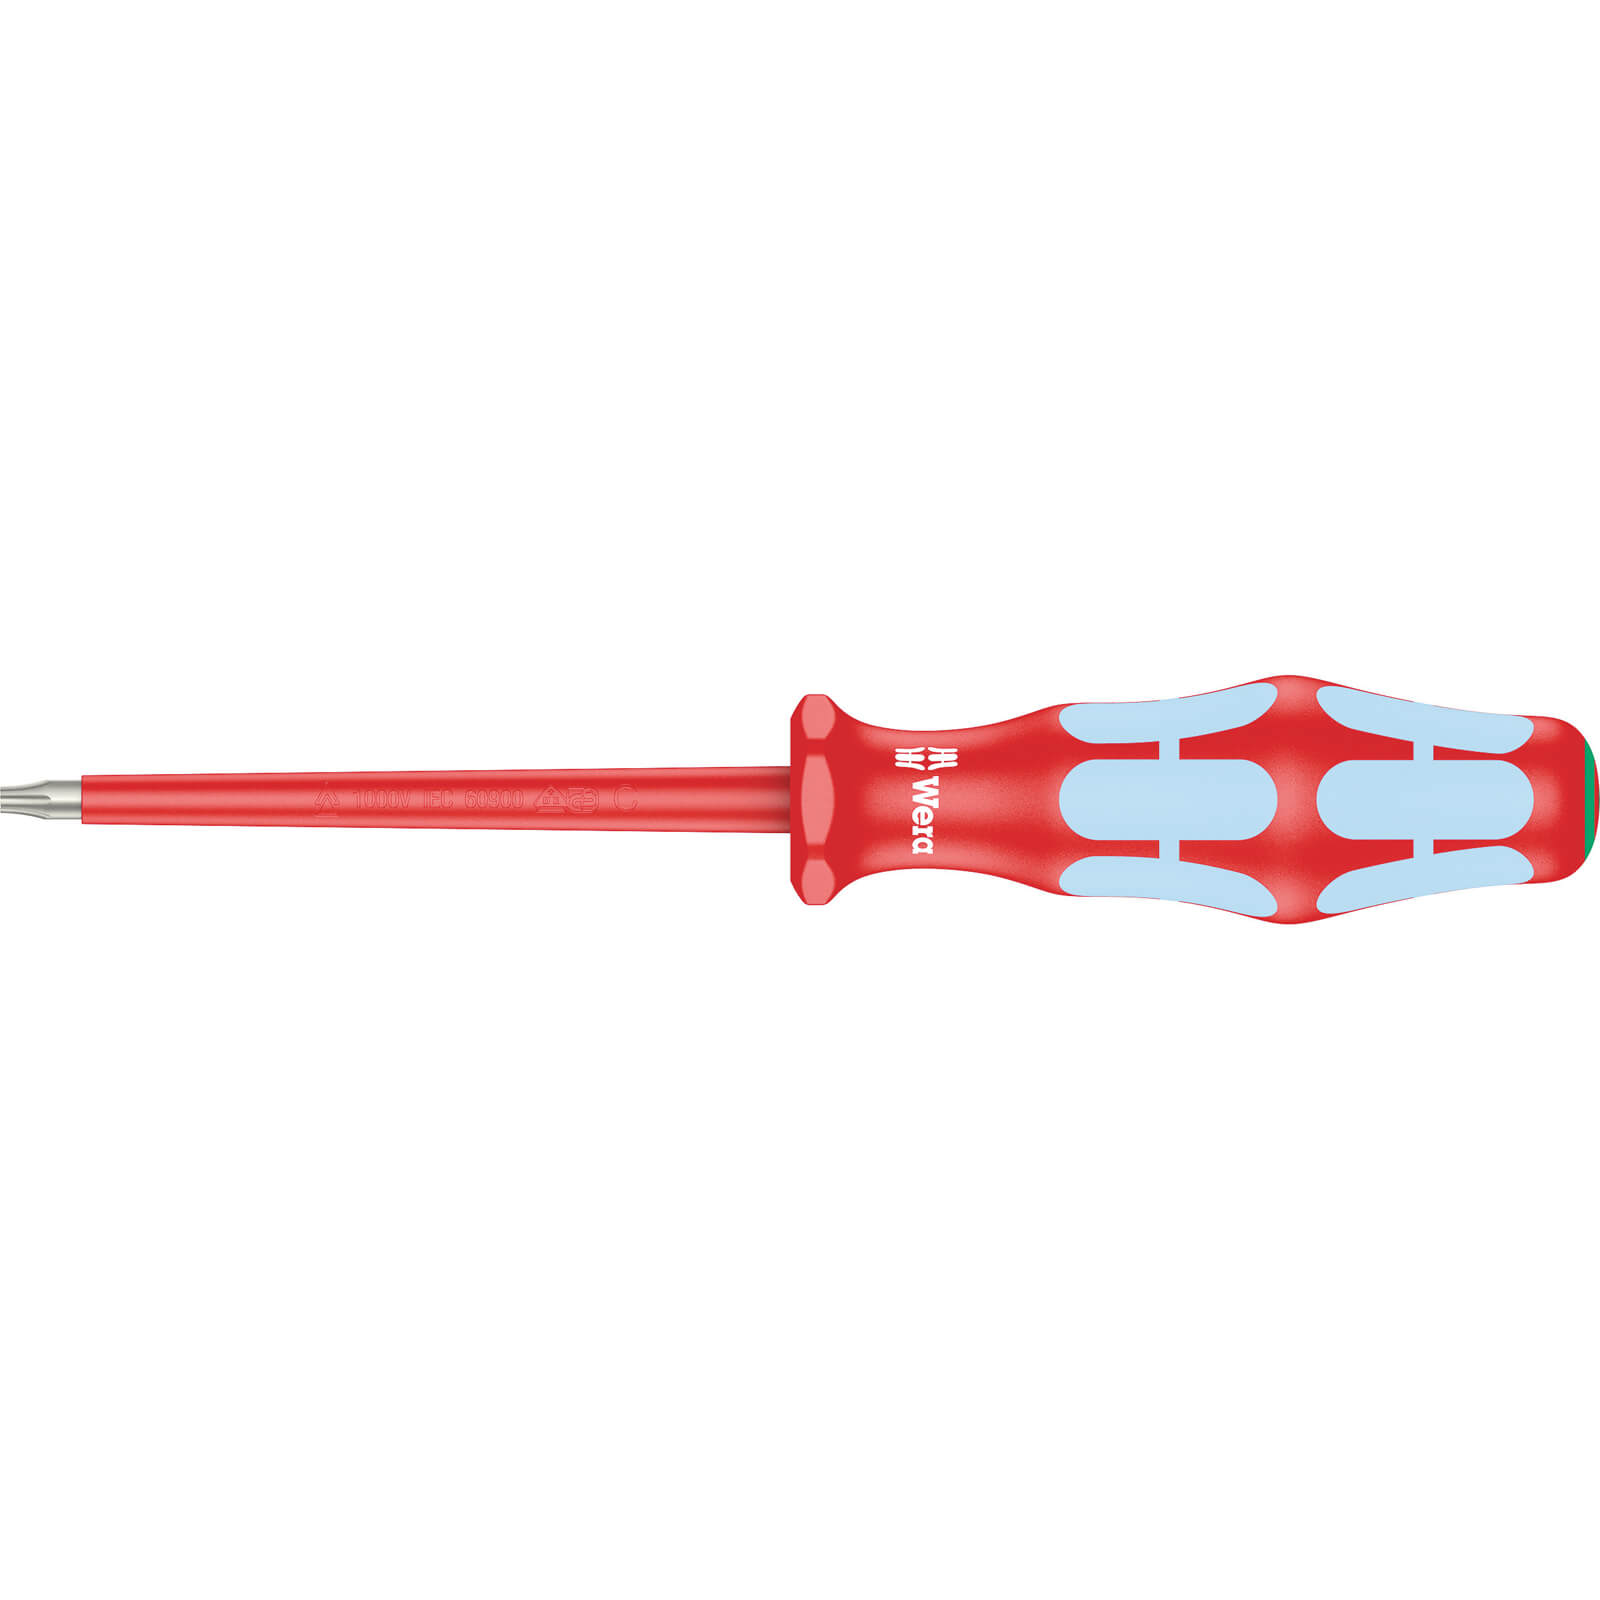 Photos - Screwdriver Wera 3167 i Stainless Steel VDE Insulated Torx  T9 80mm 3167 i 